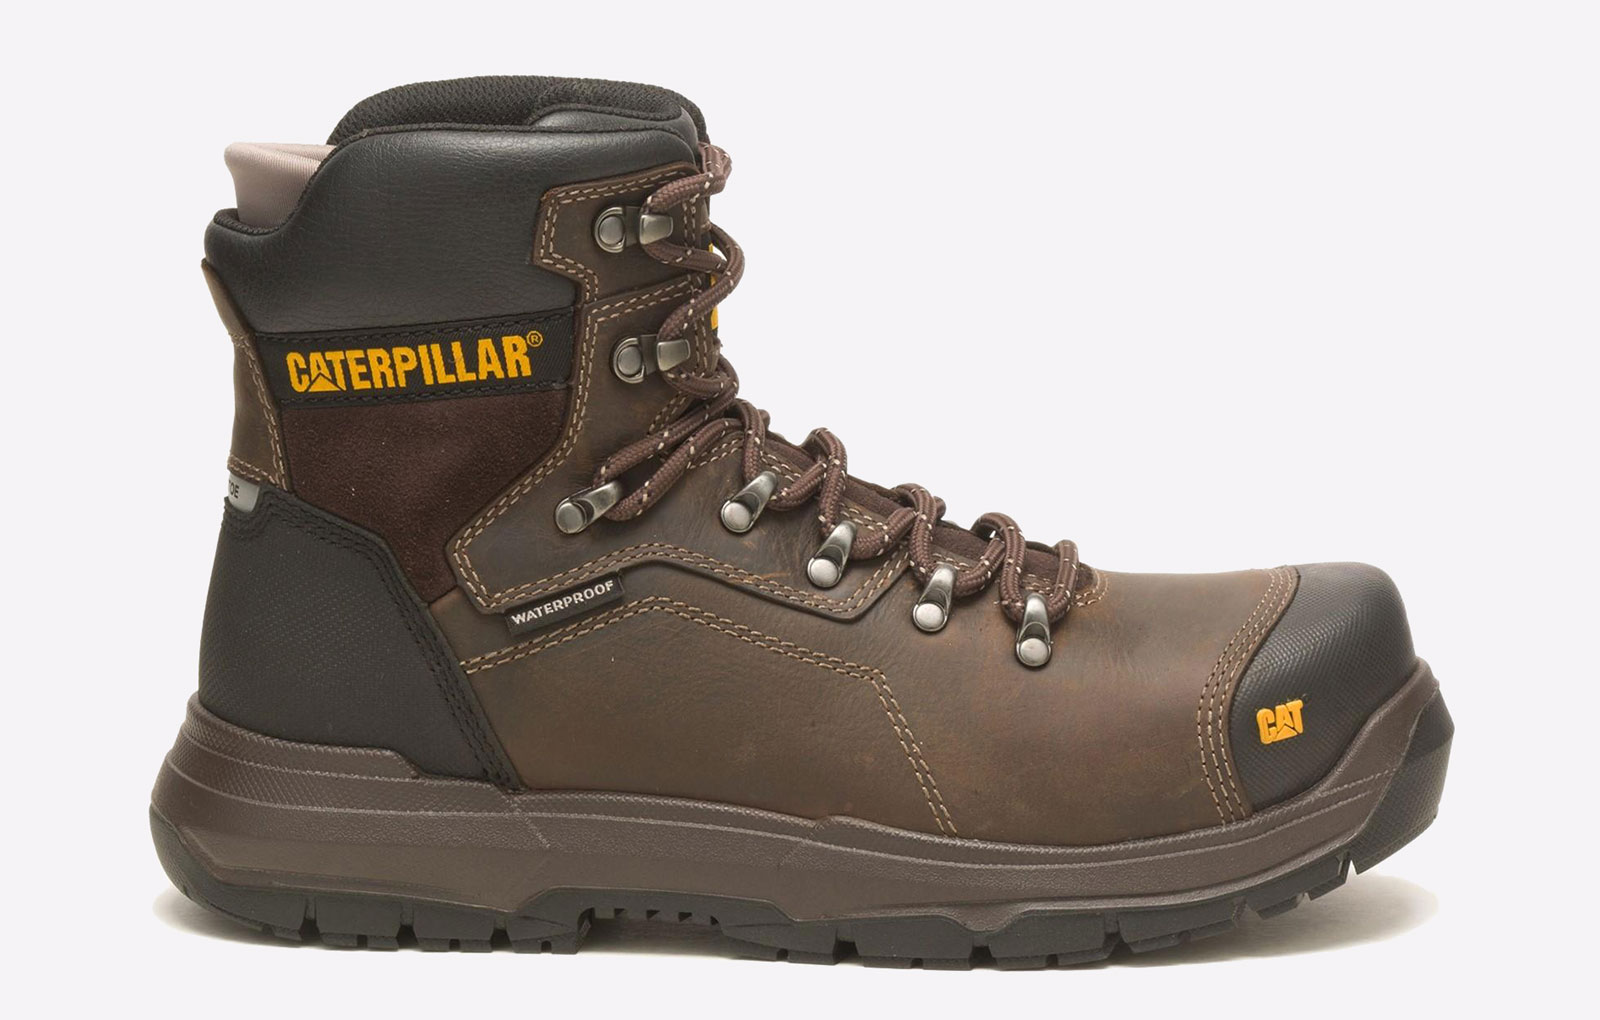 Caterpillar Diagnostic 2.0 Safety Boot WATERPROOF Mens - GRD-39322-73425-10